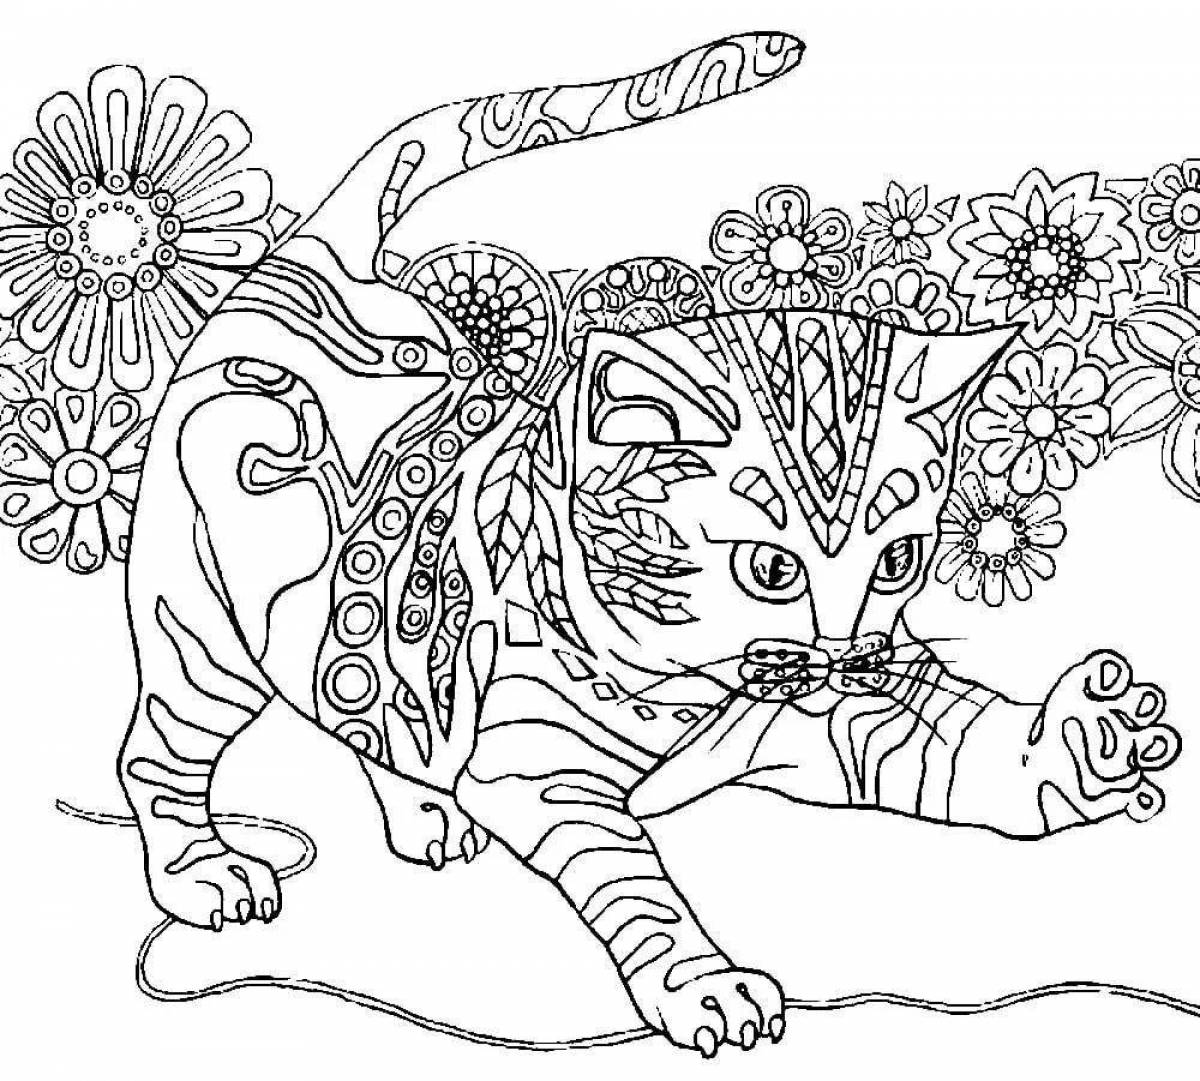 Violent coloring pages animals for children 10-12 years old